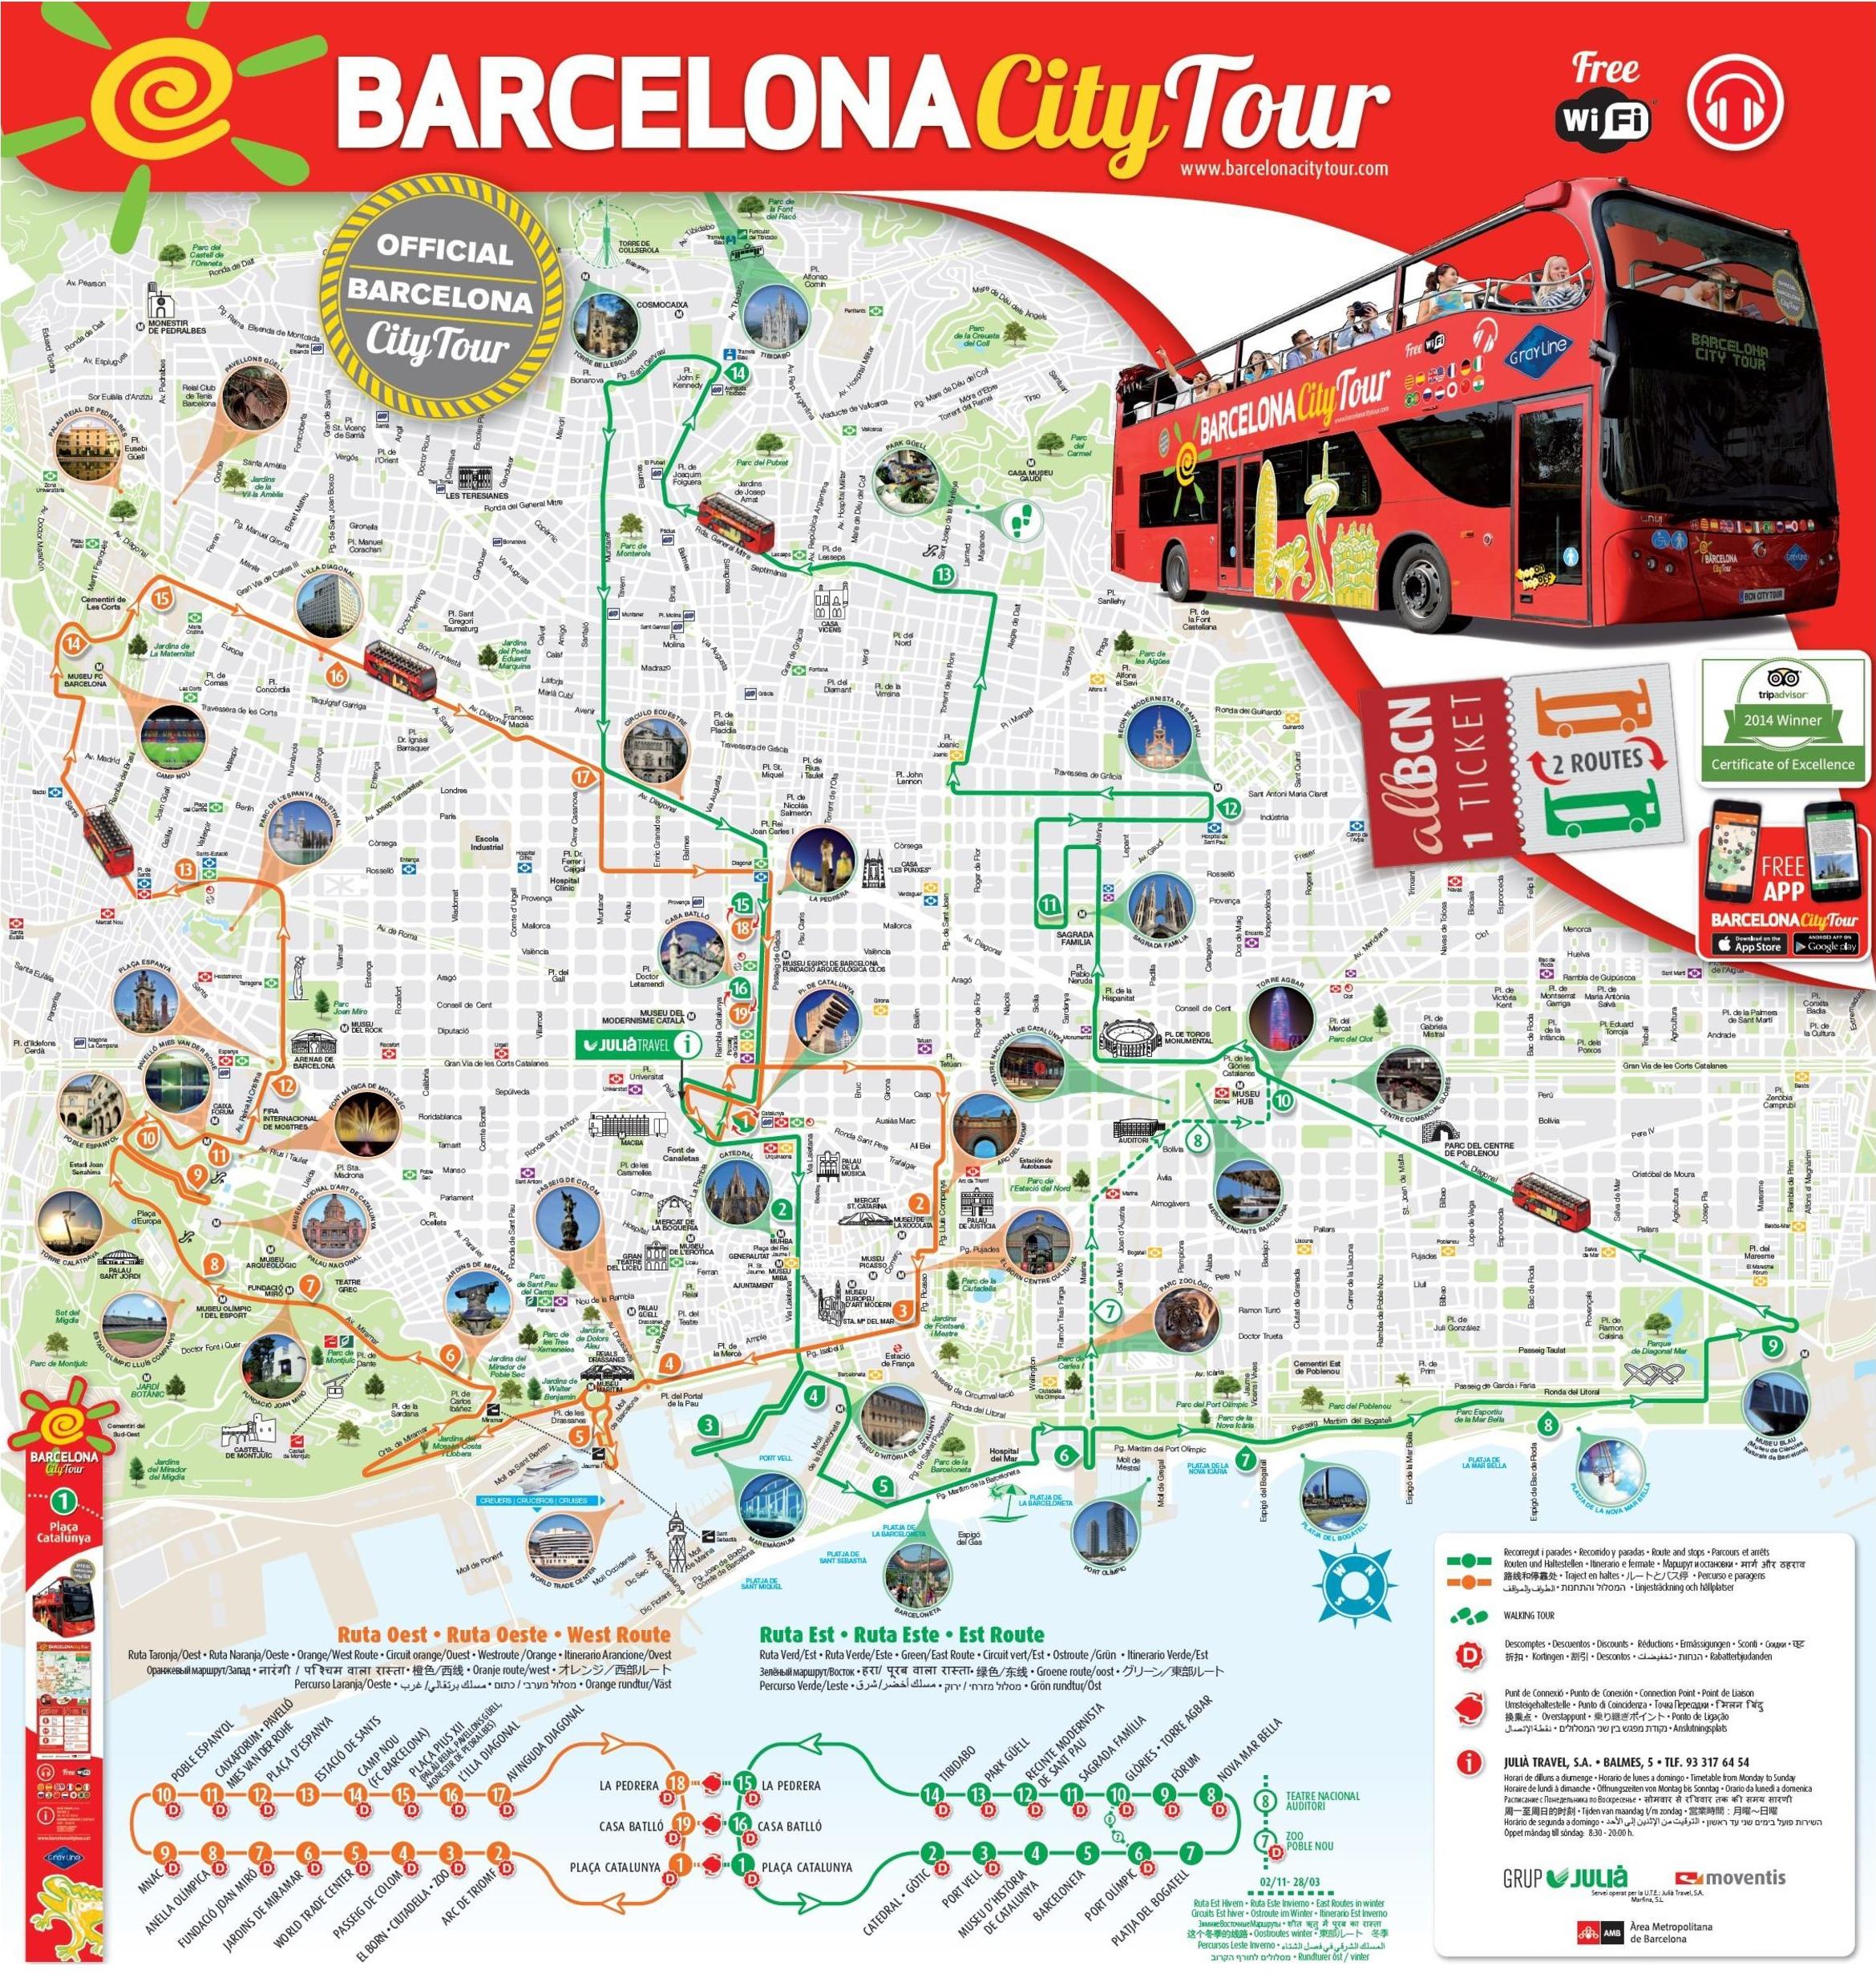 Barcelona red bus tour map Red bus tour barcelona map (Catalonia Spain)